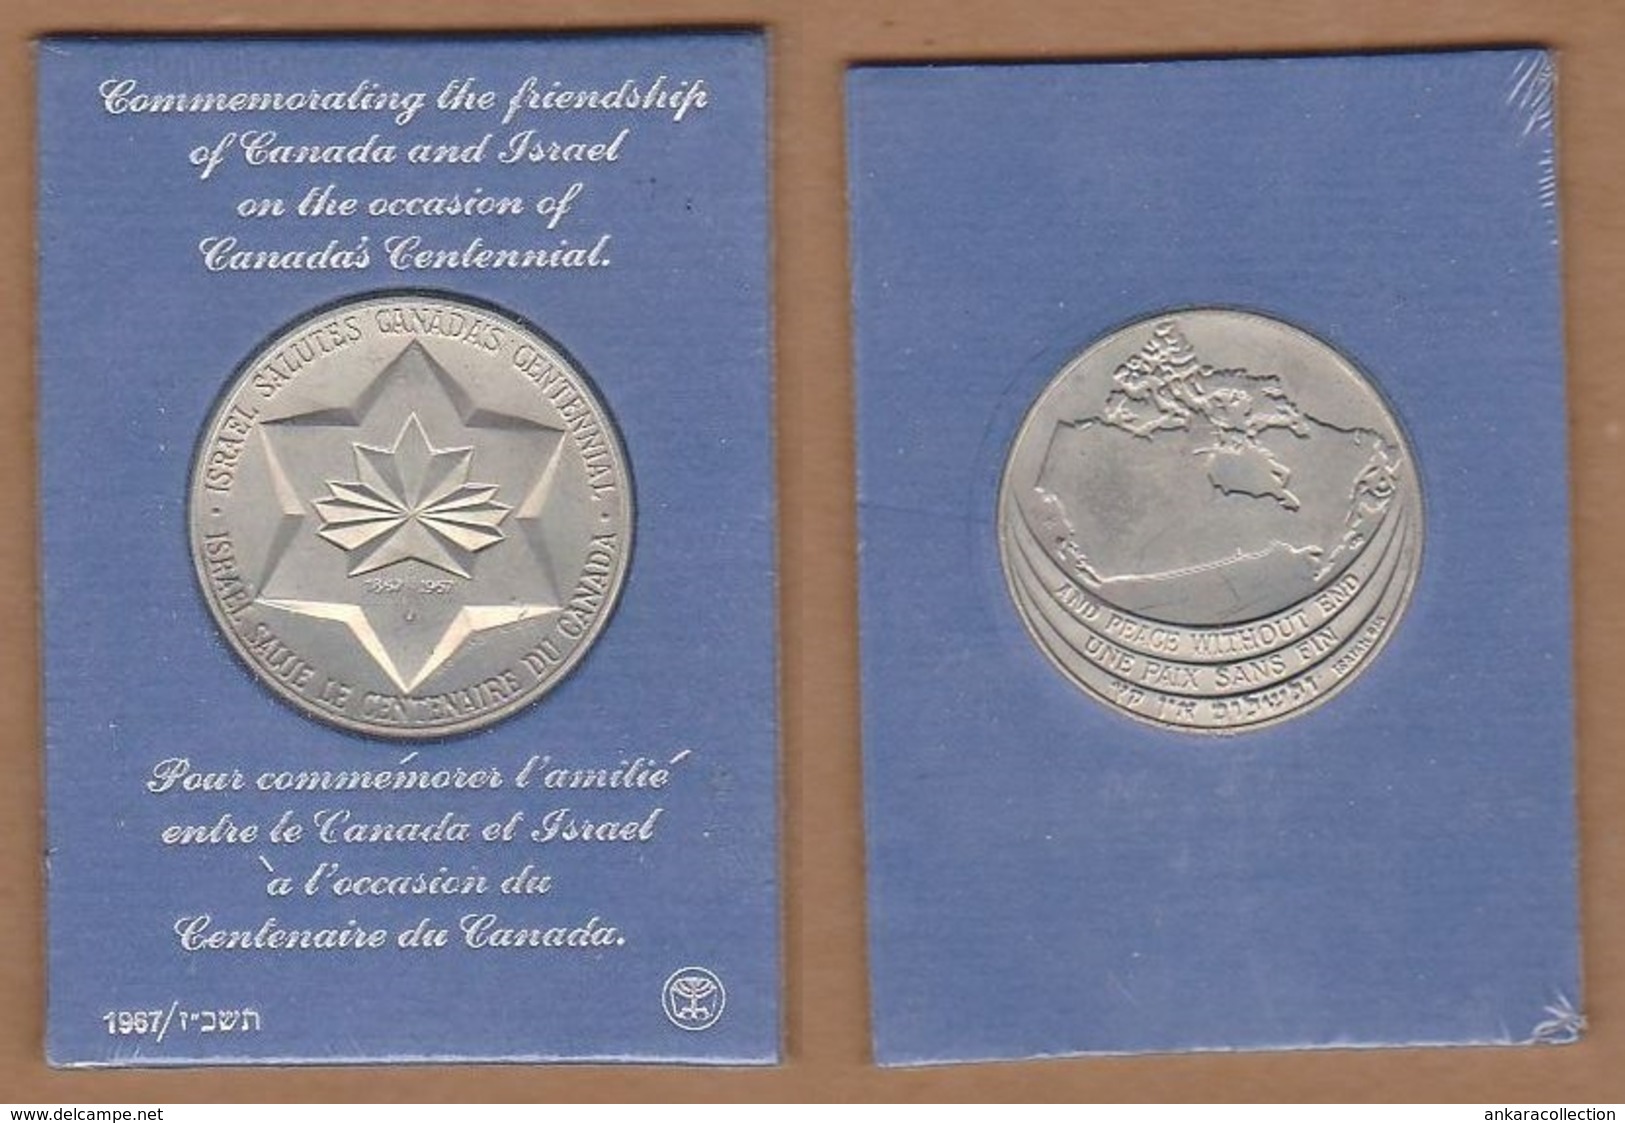 AC - COMMEMORATING THE FRIENDSHIP OF CANADA AND ISRAEL ON THE OCCASION OF CANADA'S CENTENNIAL 1967 MEDAL MEDALLION - Royaux / De Noblesse